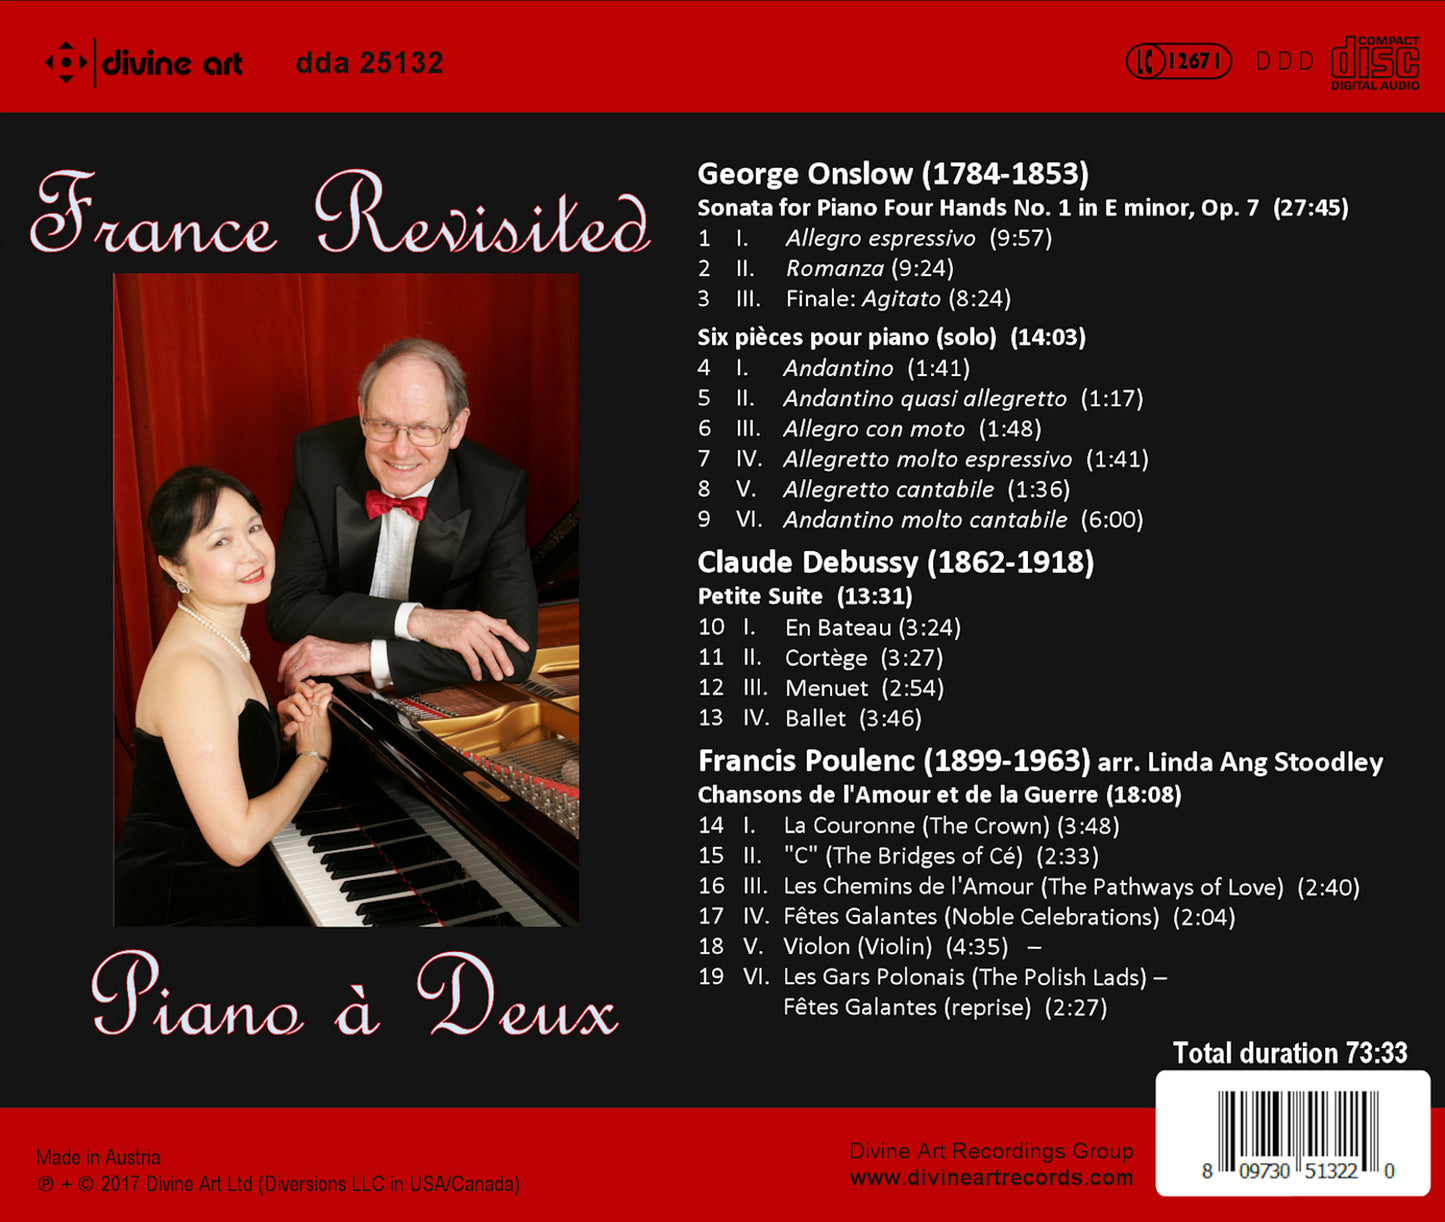 France Revisited: Music by Onslow, Debussy & Poulenc / Piano à Deux